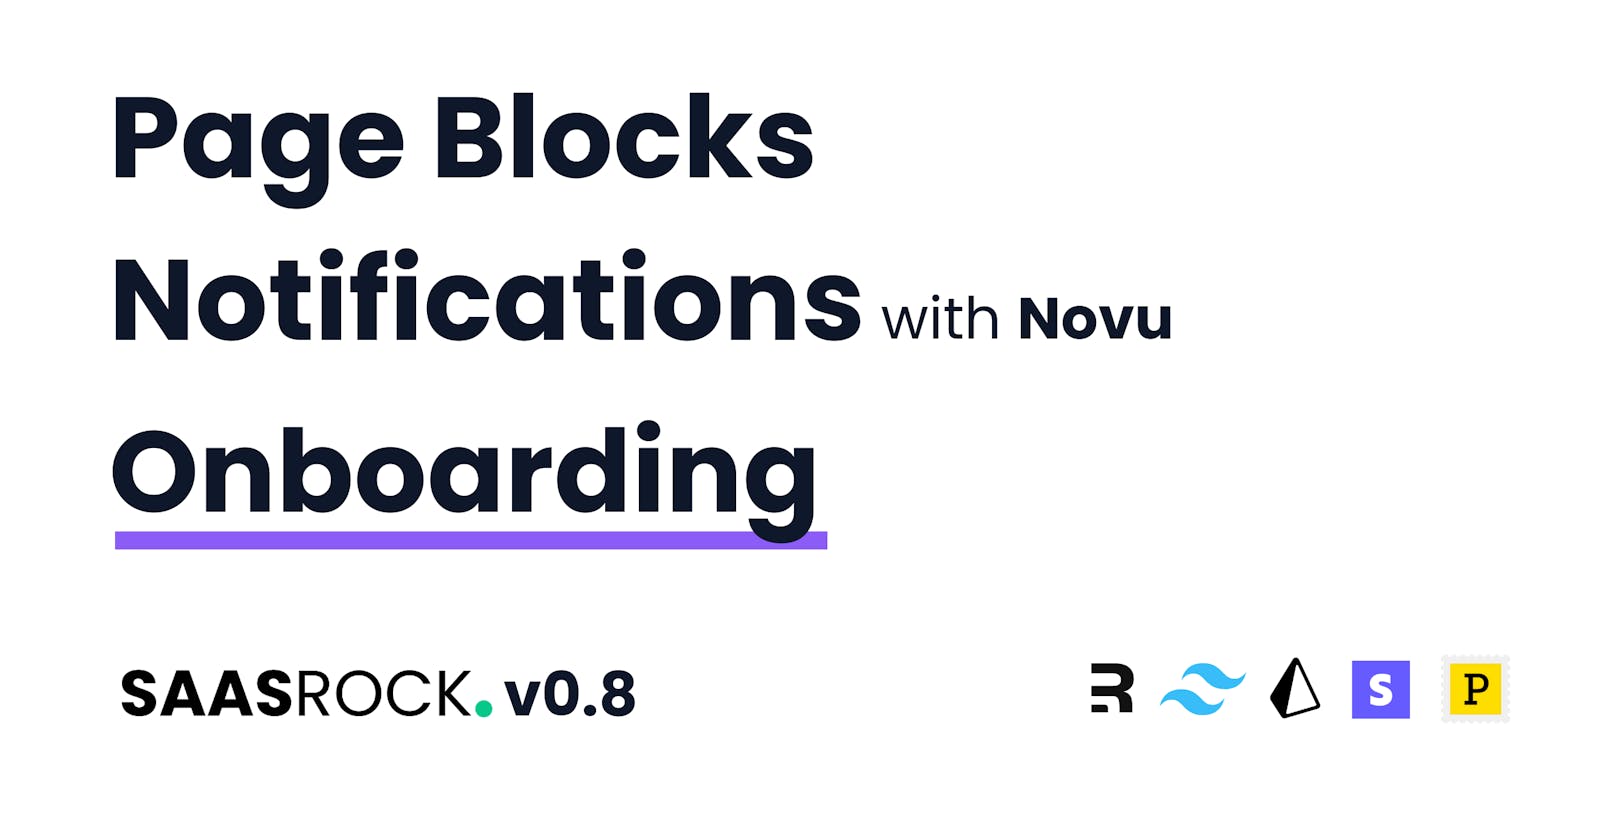 SaasRock v0.8 - Page Blocks, Notifications, and Onboarding